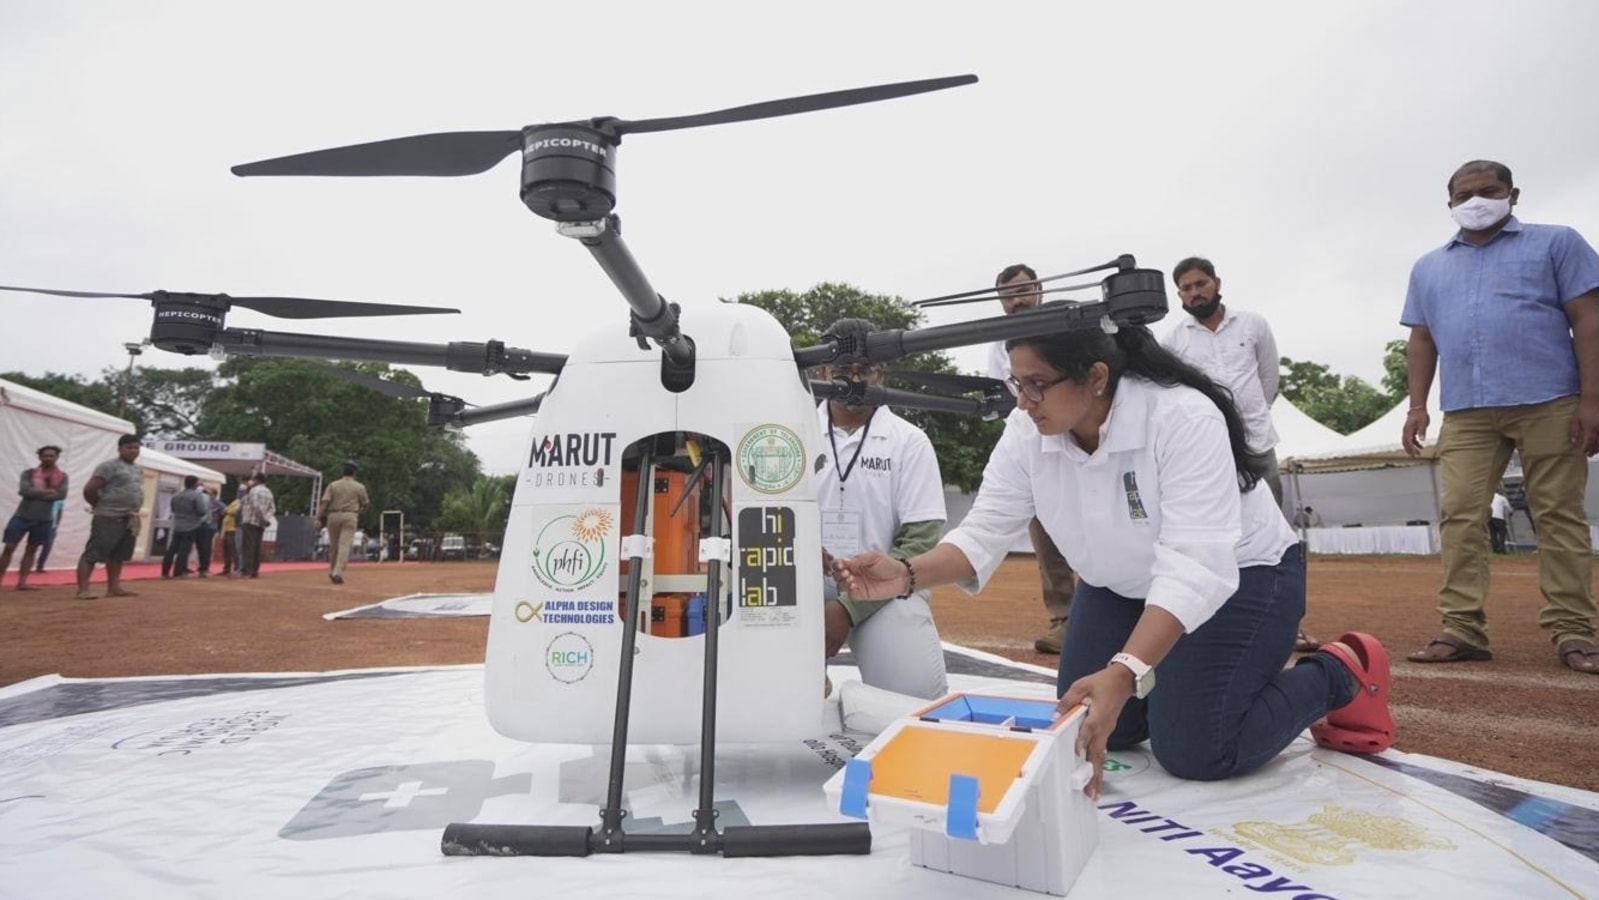 Drones in India: Who can buy them, what are usage conditions and